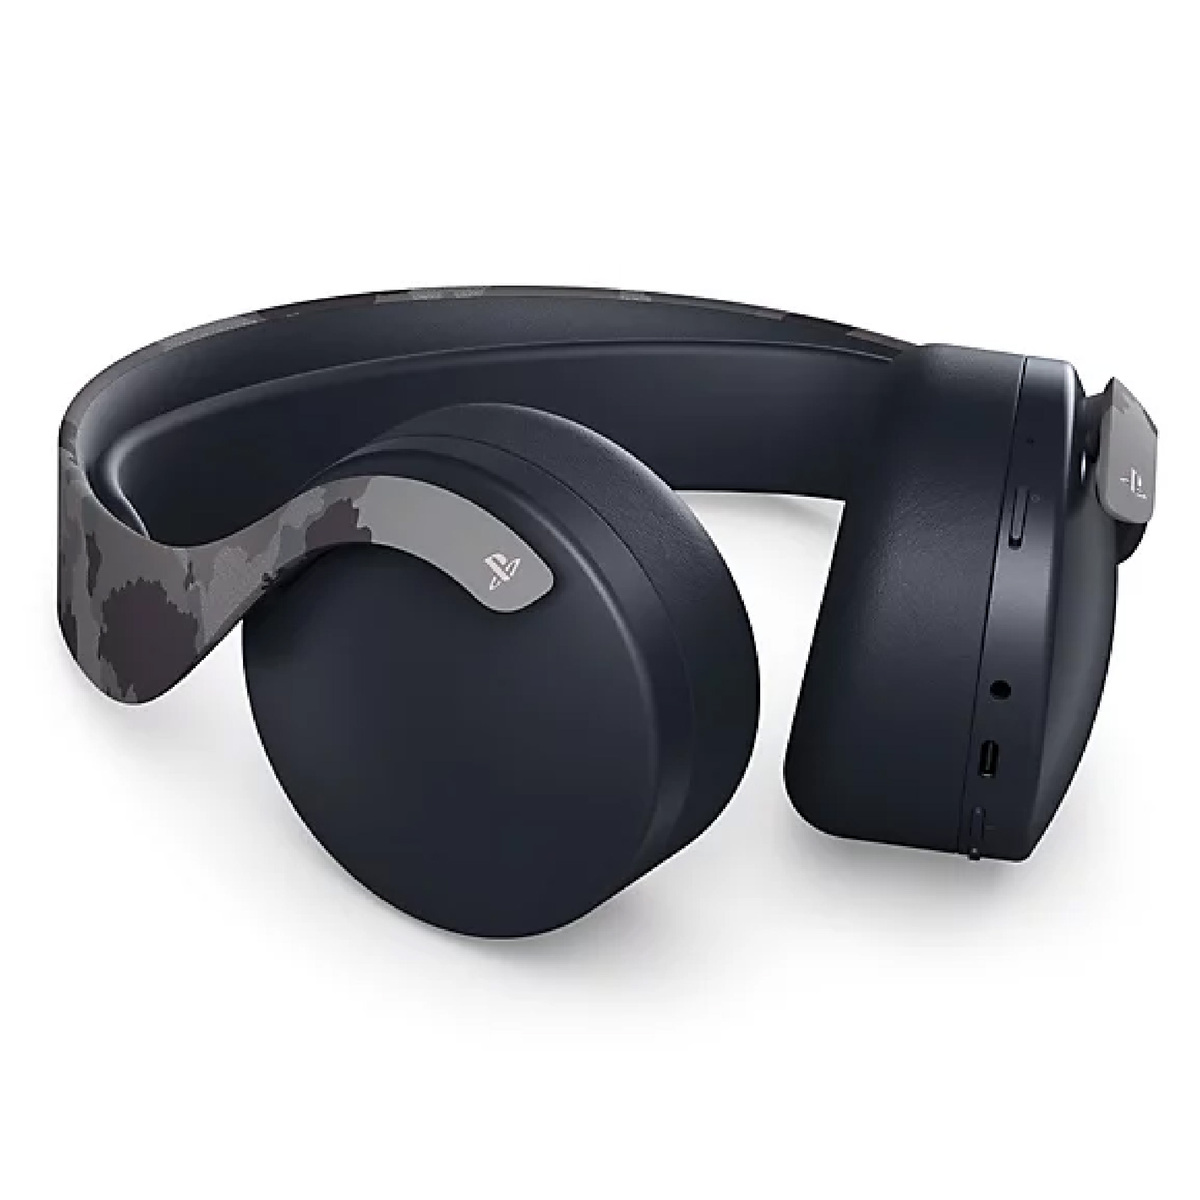 Sony PS5 PULSE 3D Wireless Headset - Gray Camouflage